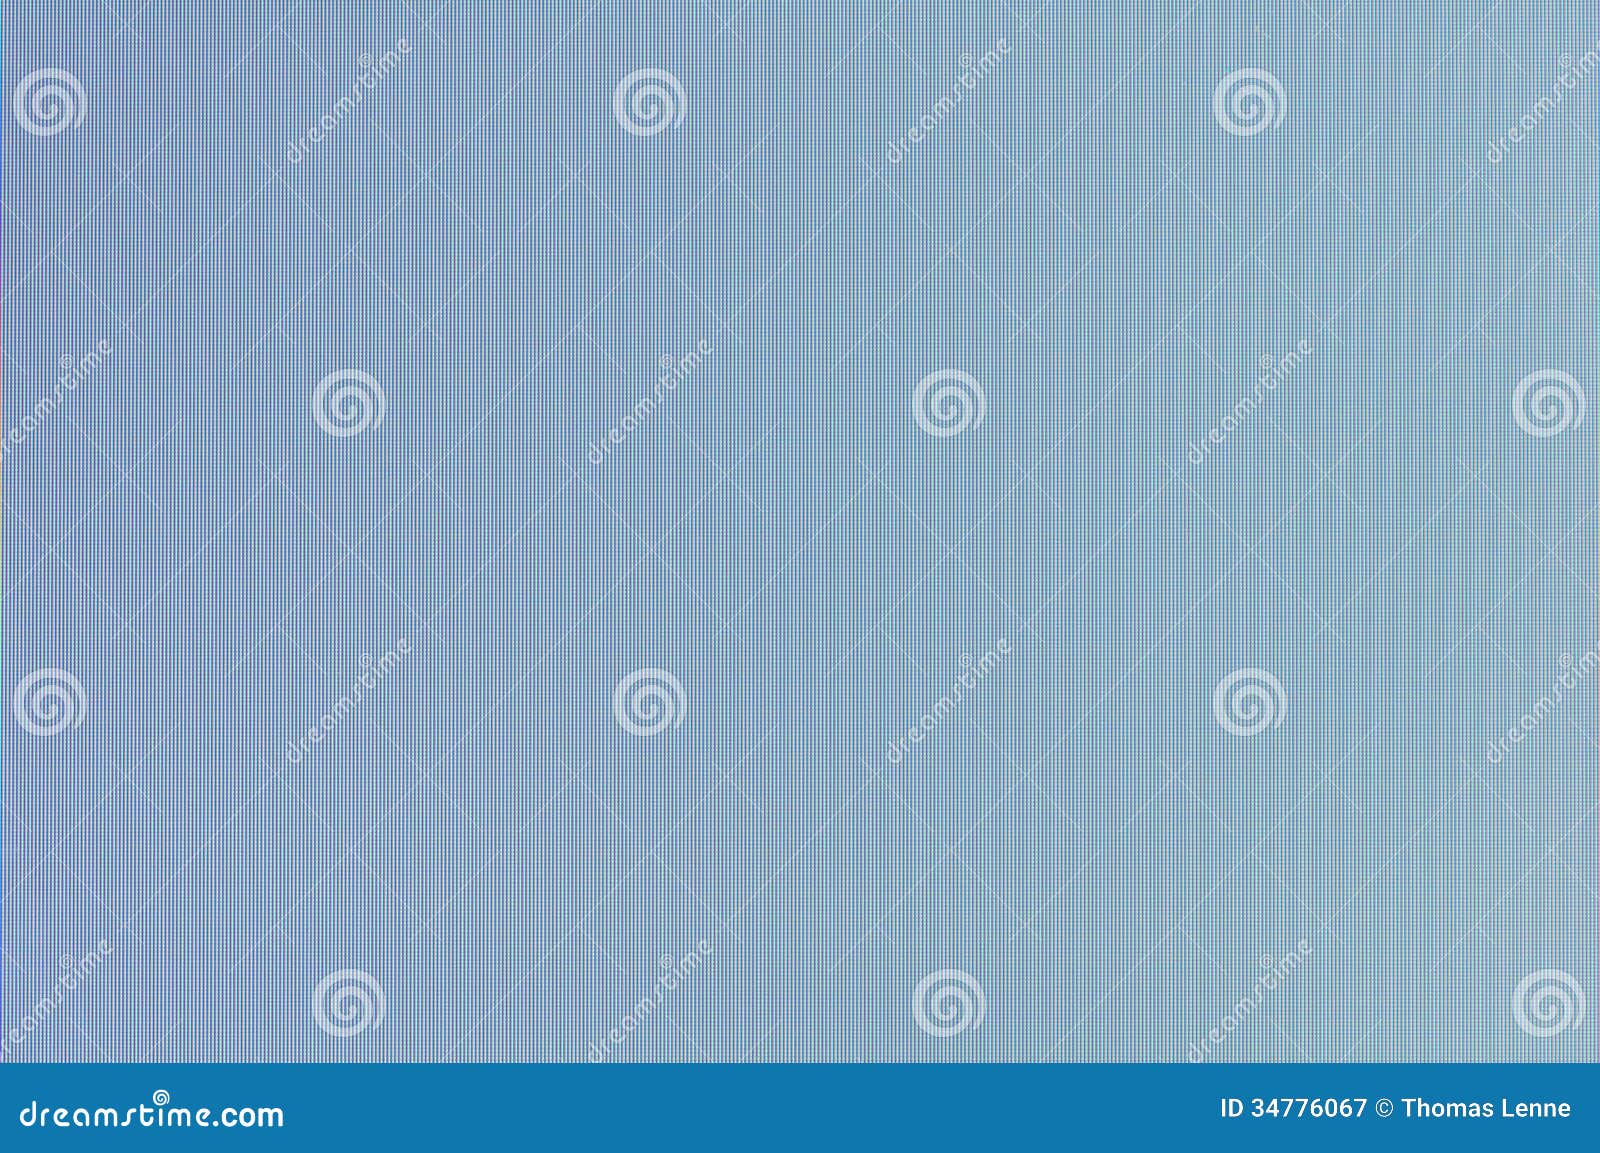 lcd screen texture background